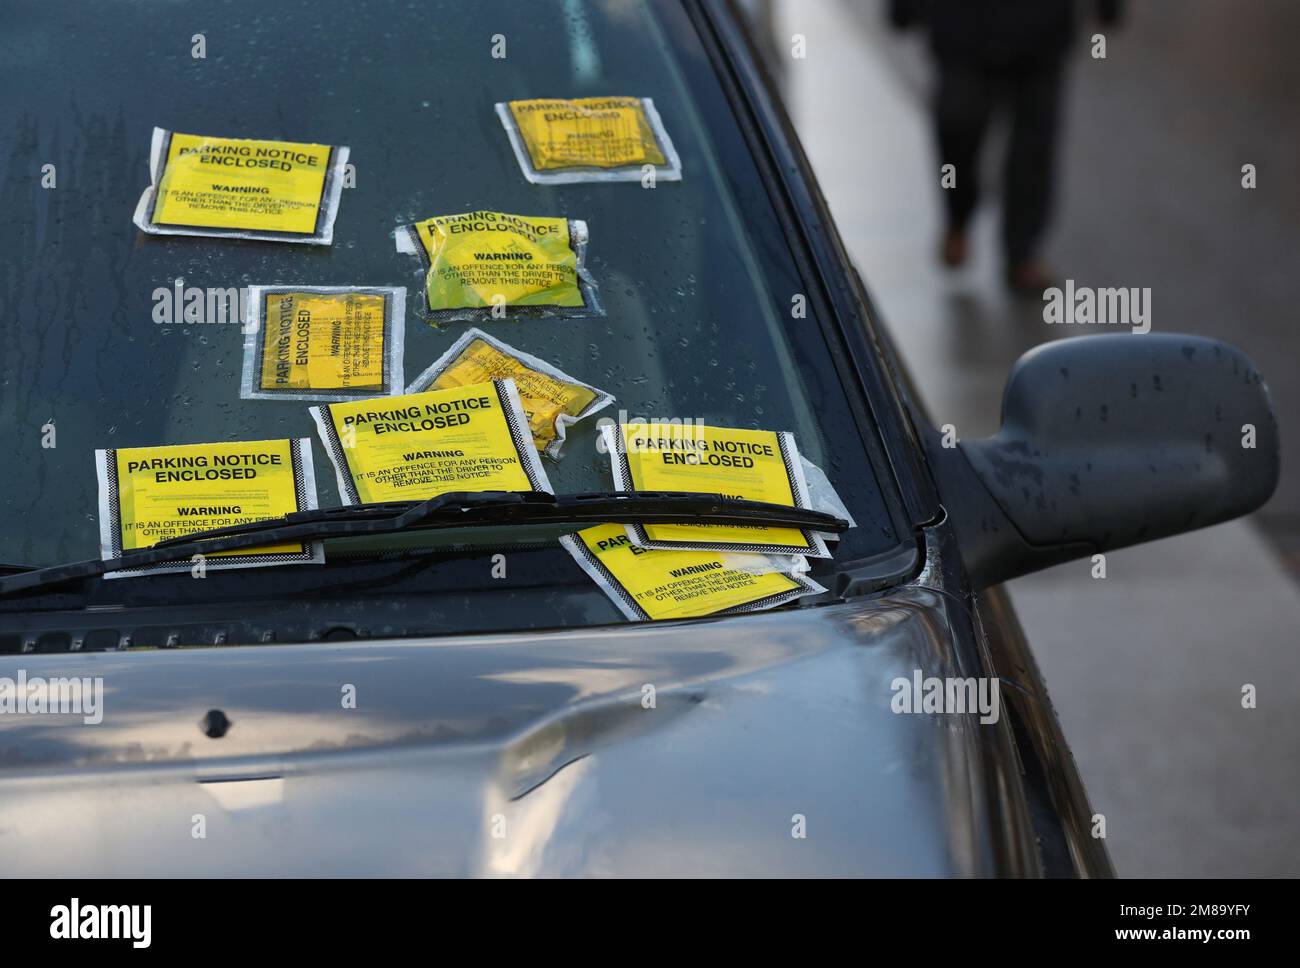 File photo dated 29/12/17 of parking notice fixed penalties attached to the windscreen of a Land Rover Freelander, as UK councils issued an average of nearly 20,000 parking fines each day last year, according to new analysis. Stock Photo